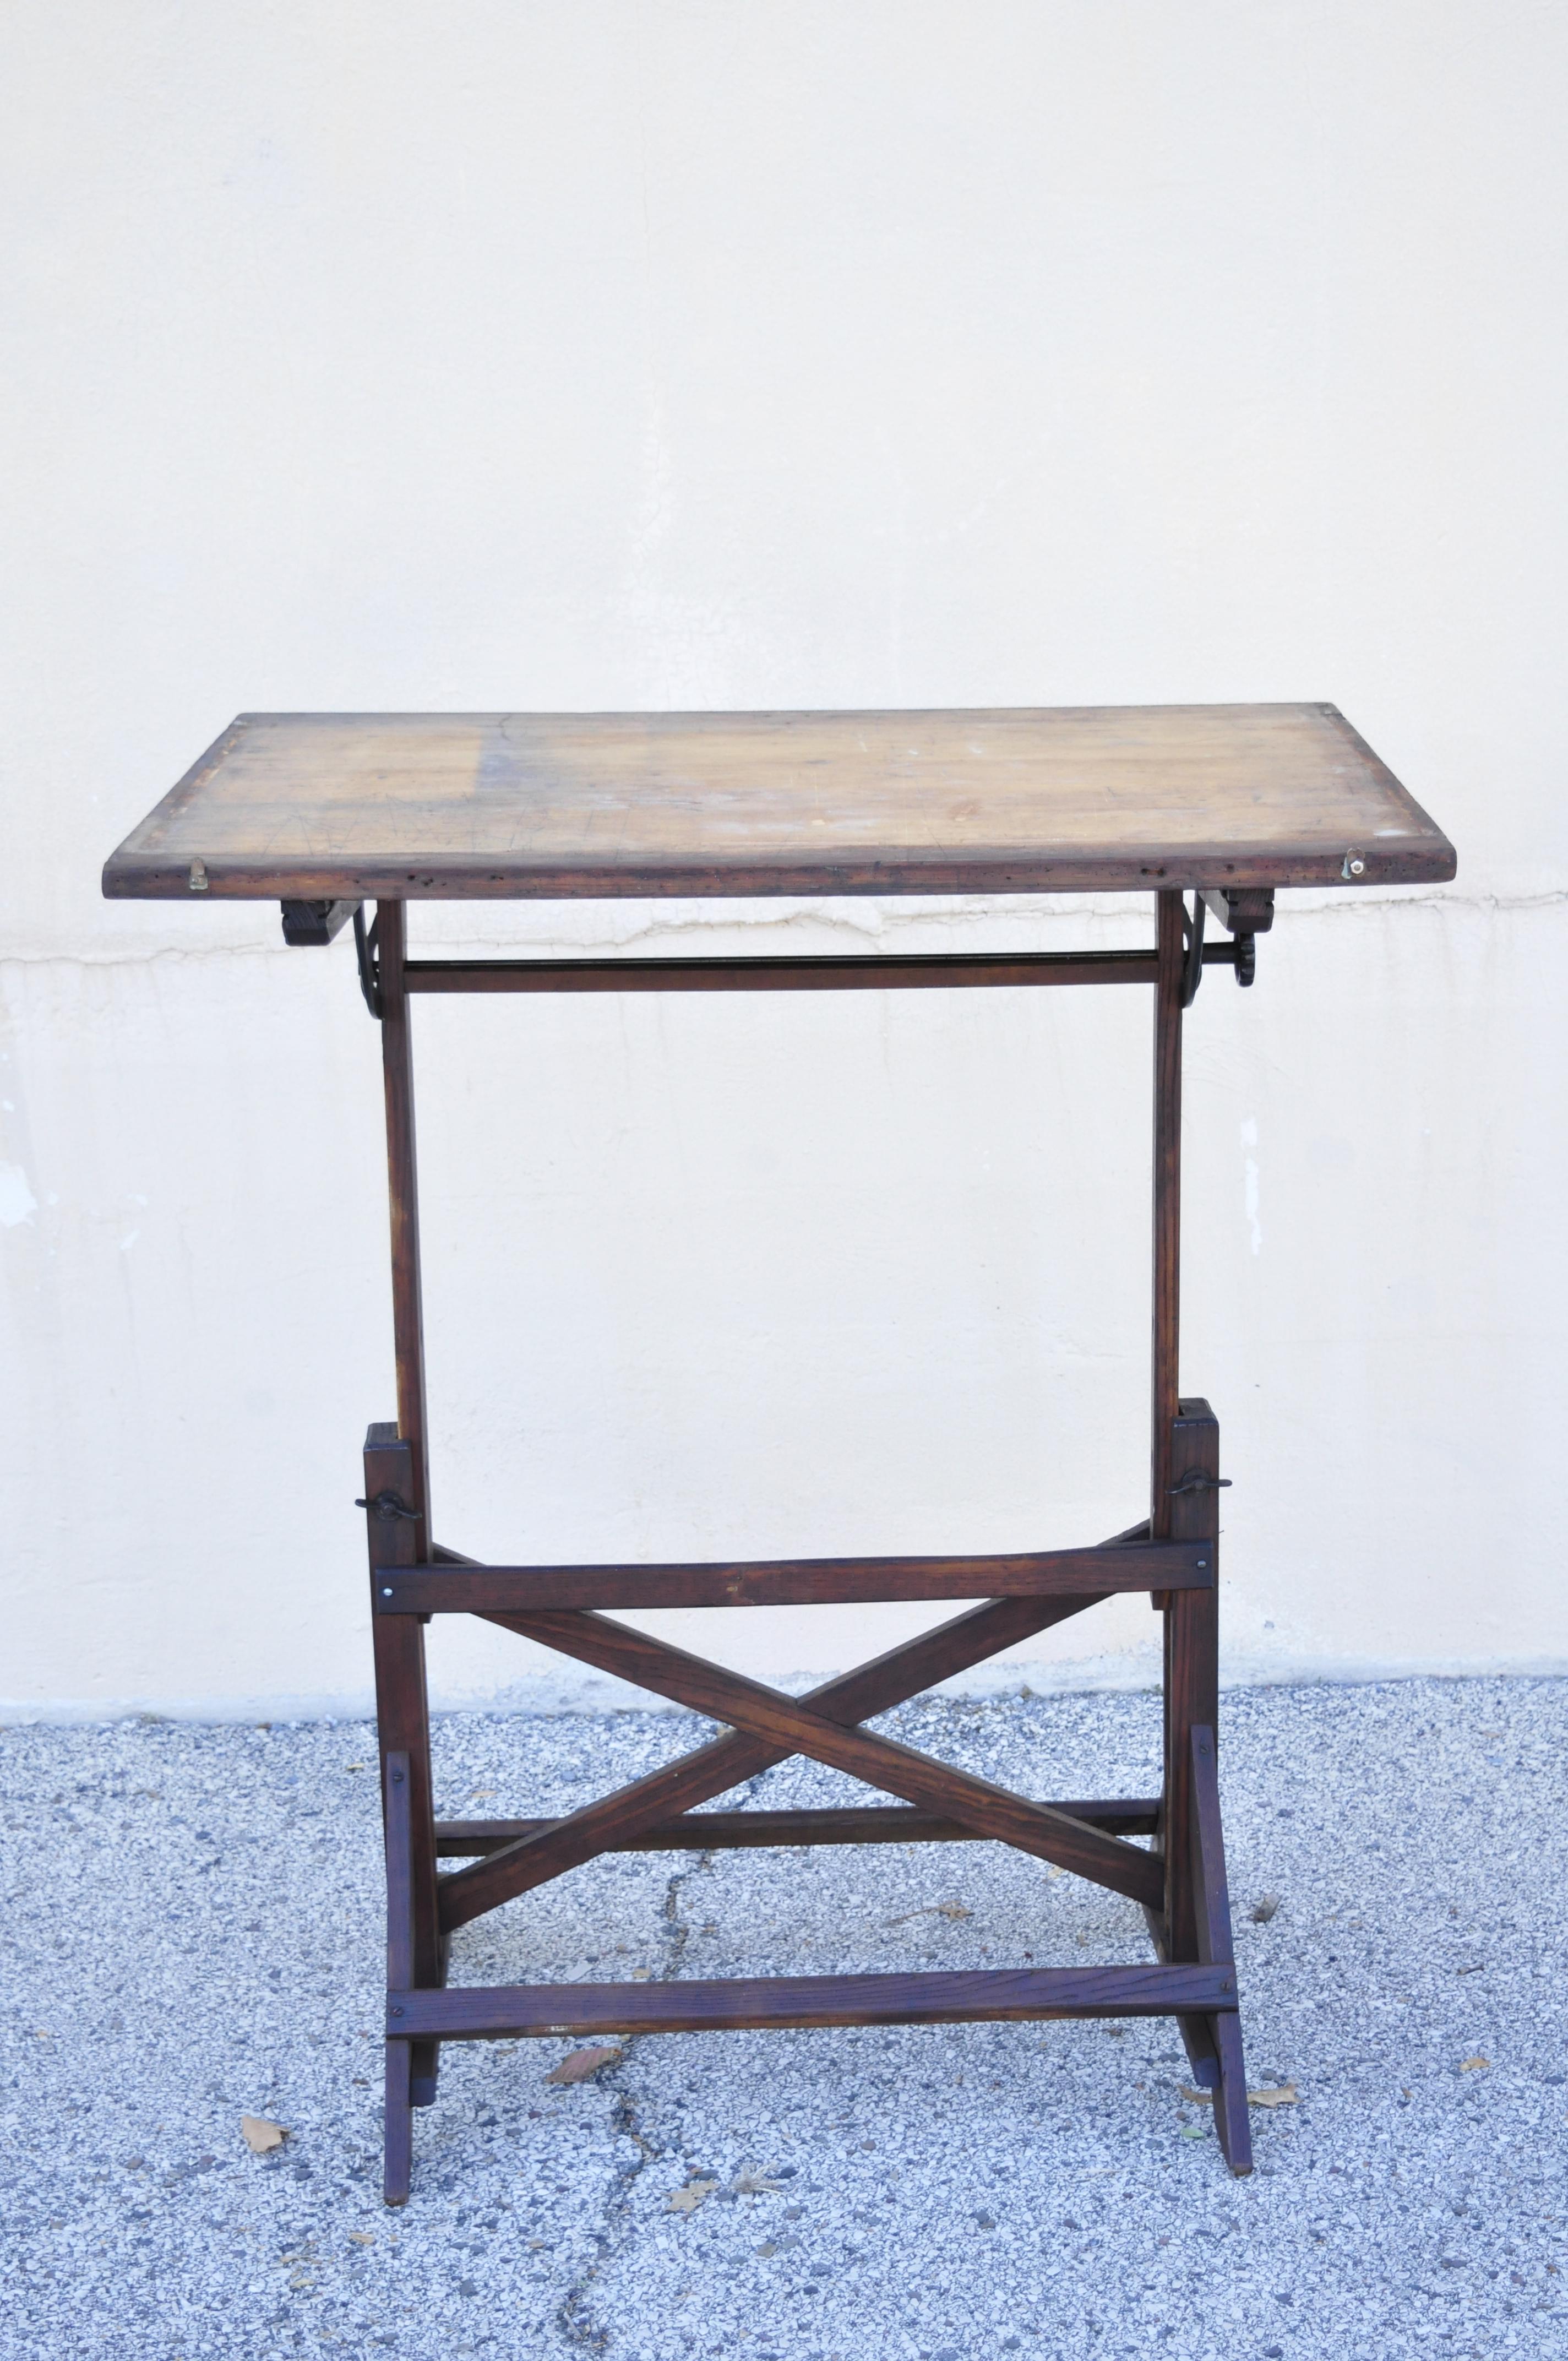 Antique American Industrial Oakwood and Cast Iron Drafting Table Work Desk 2